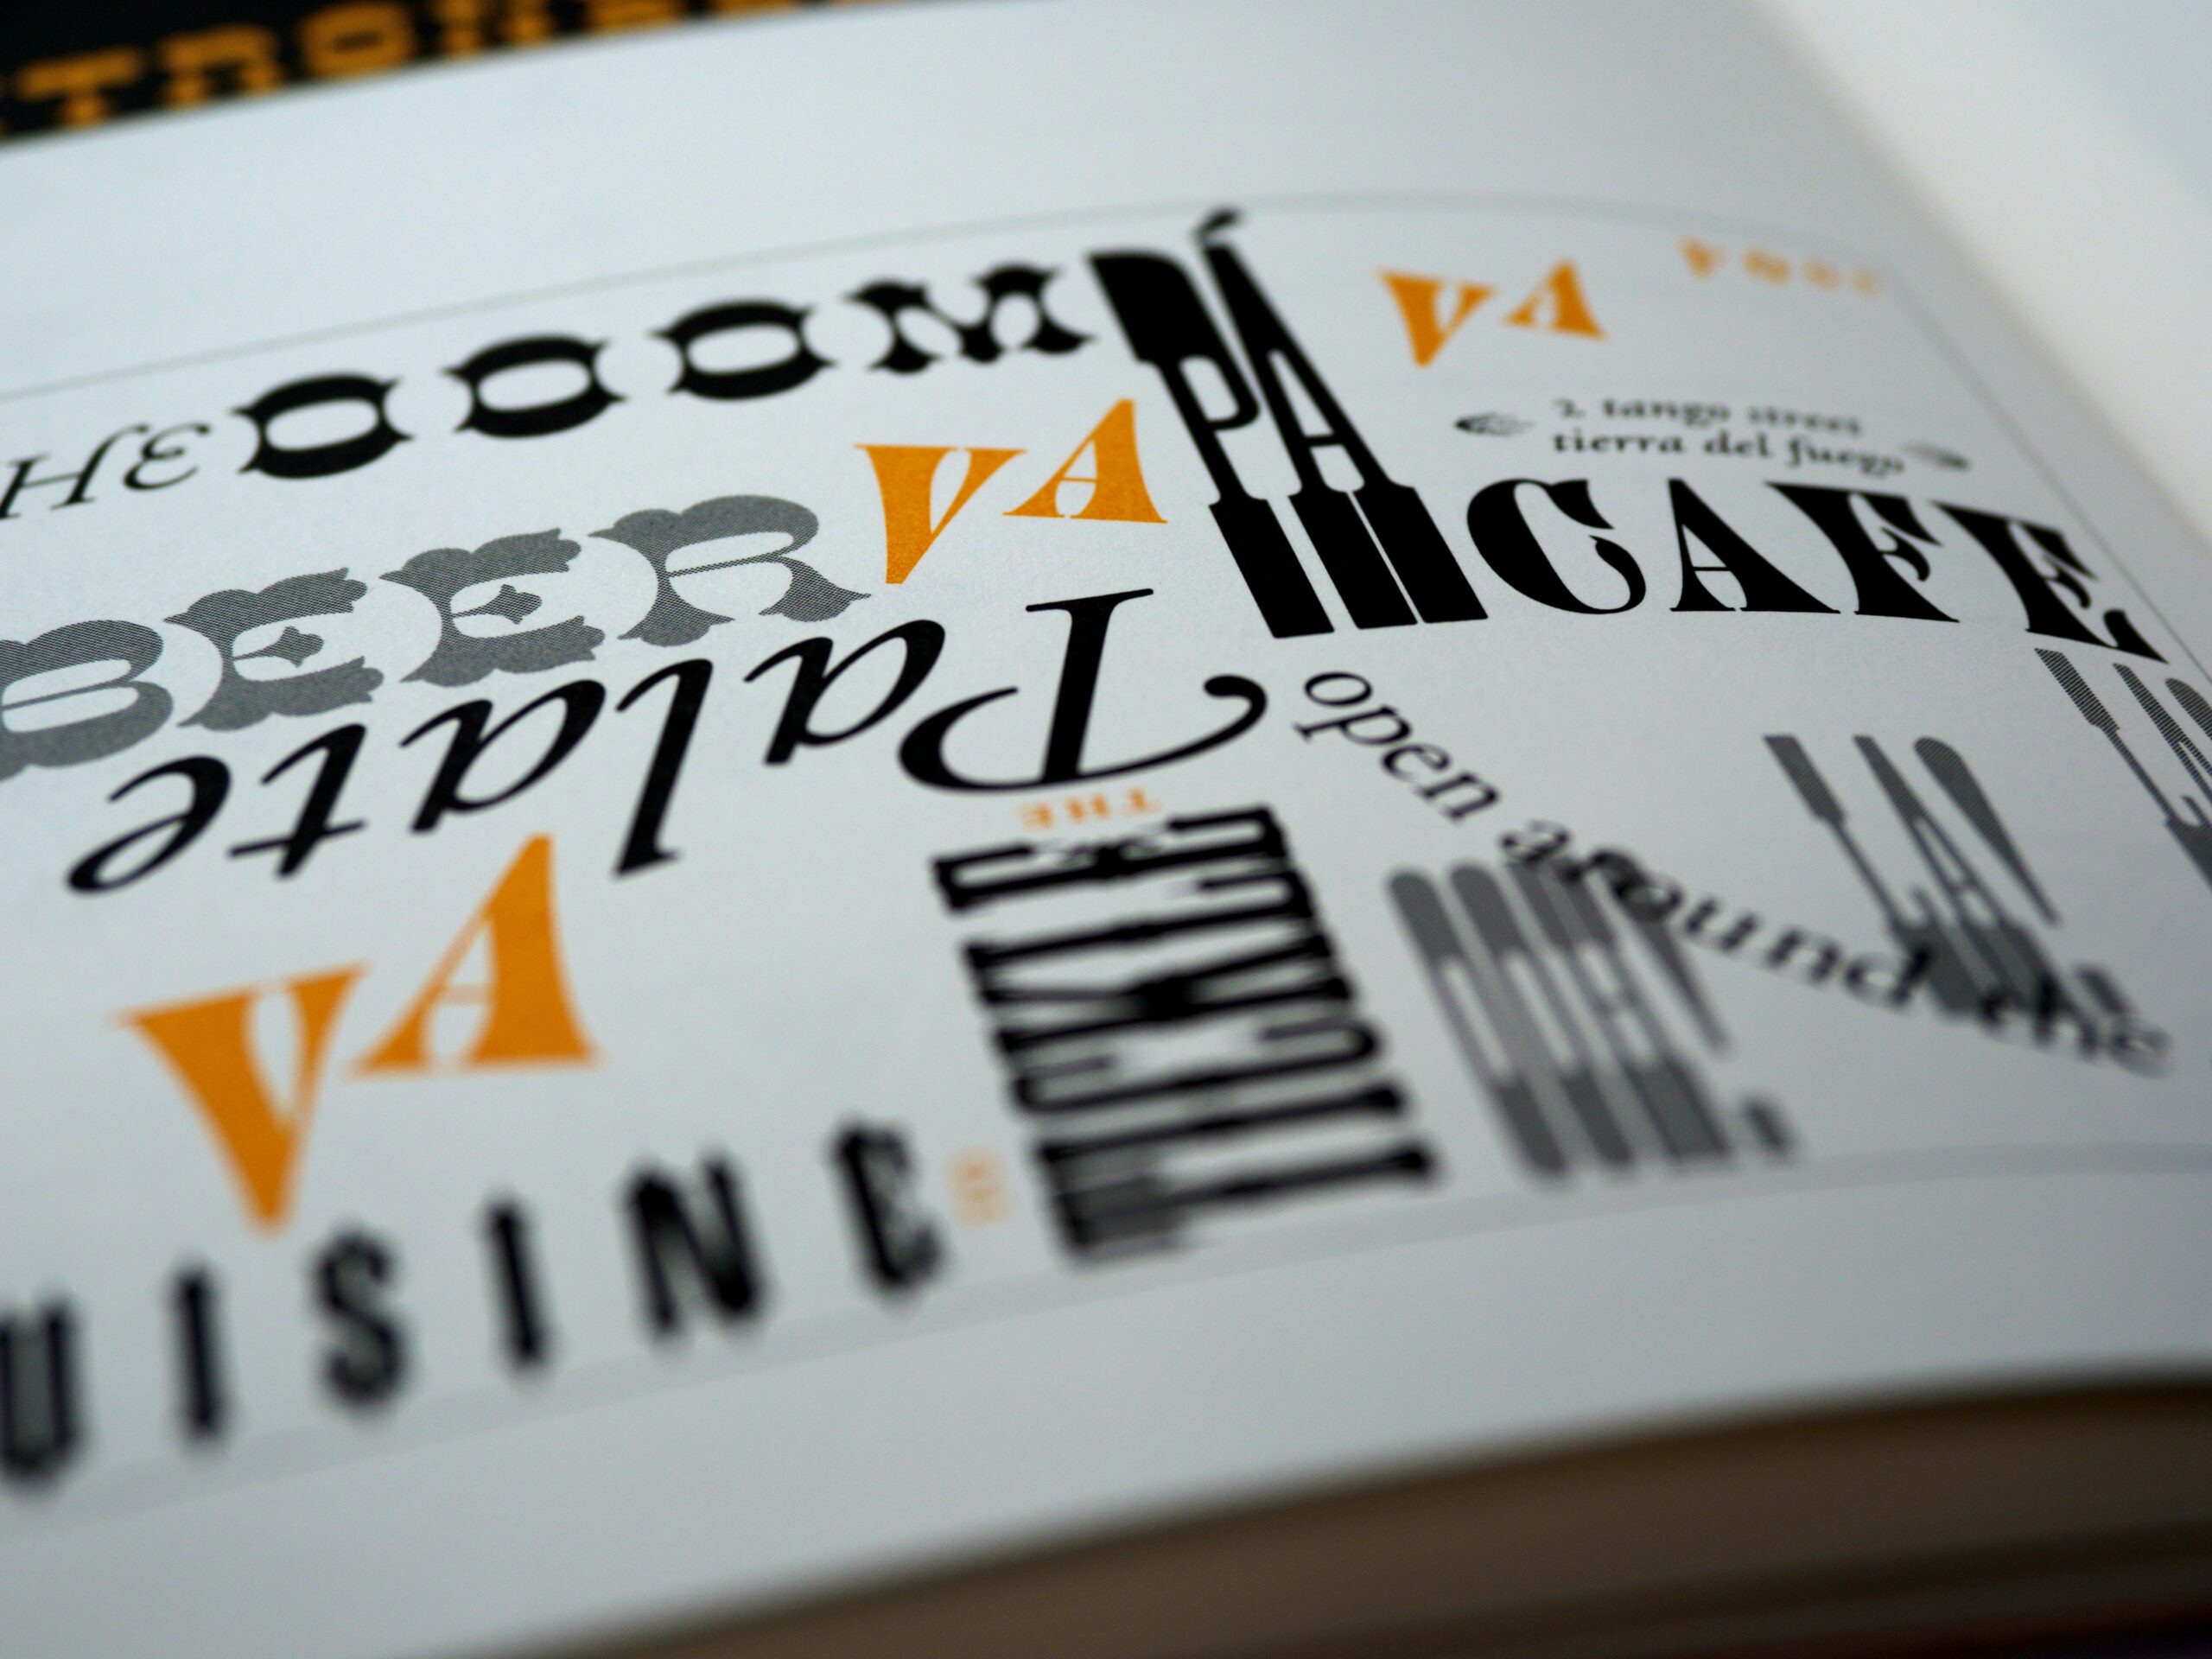 Orange, black, and grey words written on a page in all sorts of fonts.